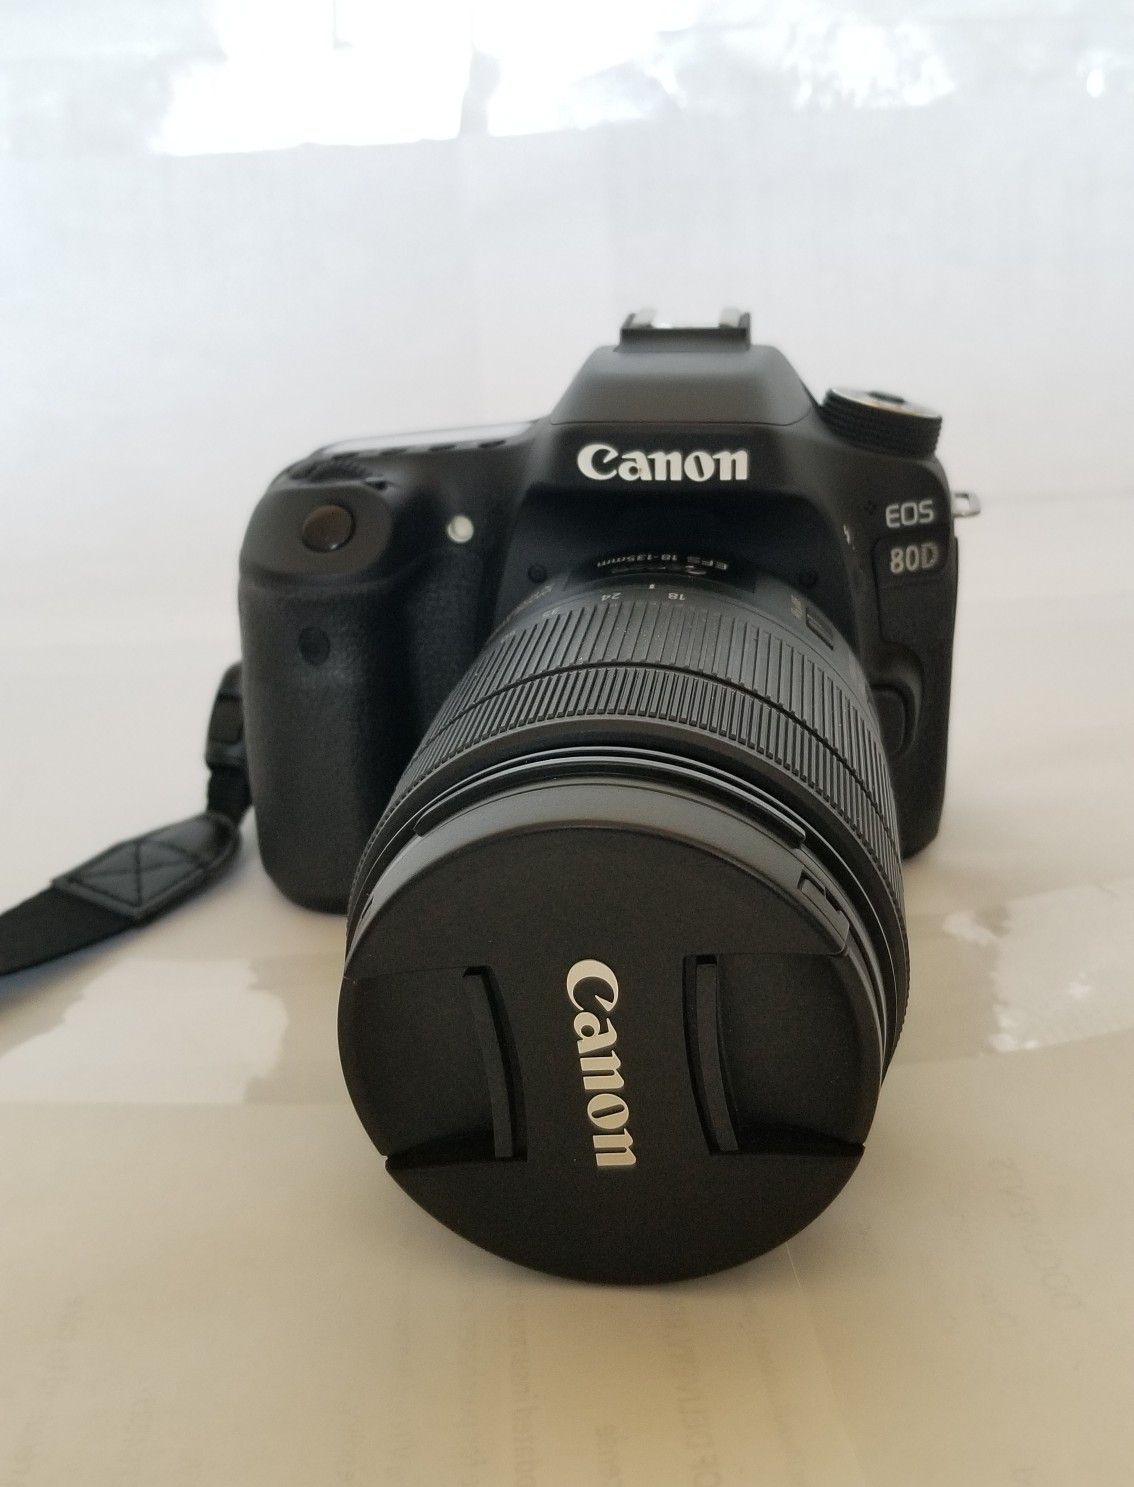 Canon 80D deslr camera everything included